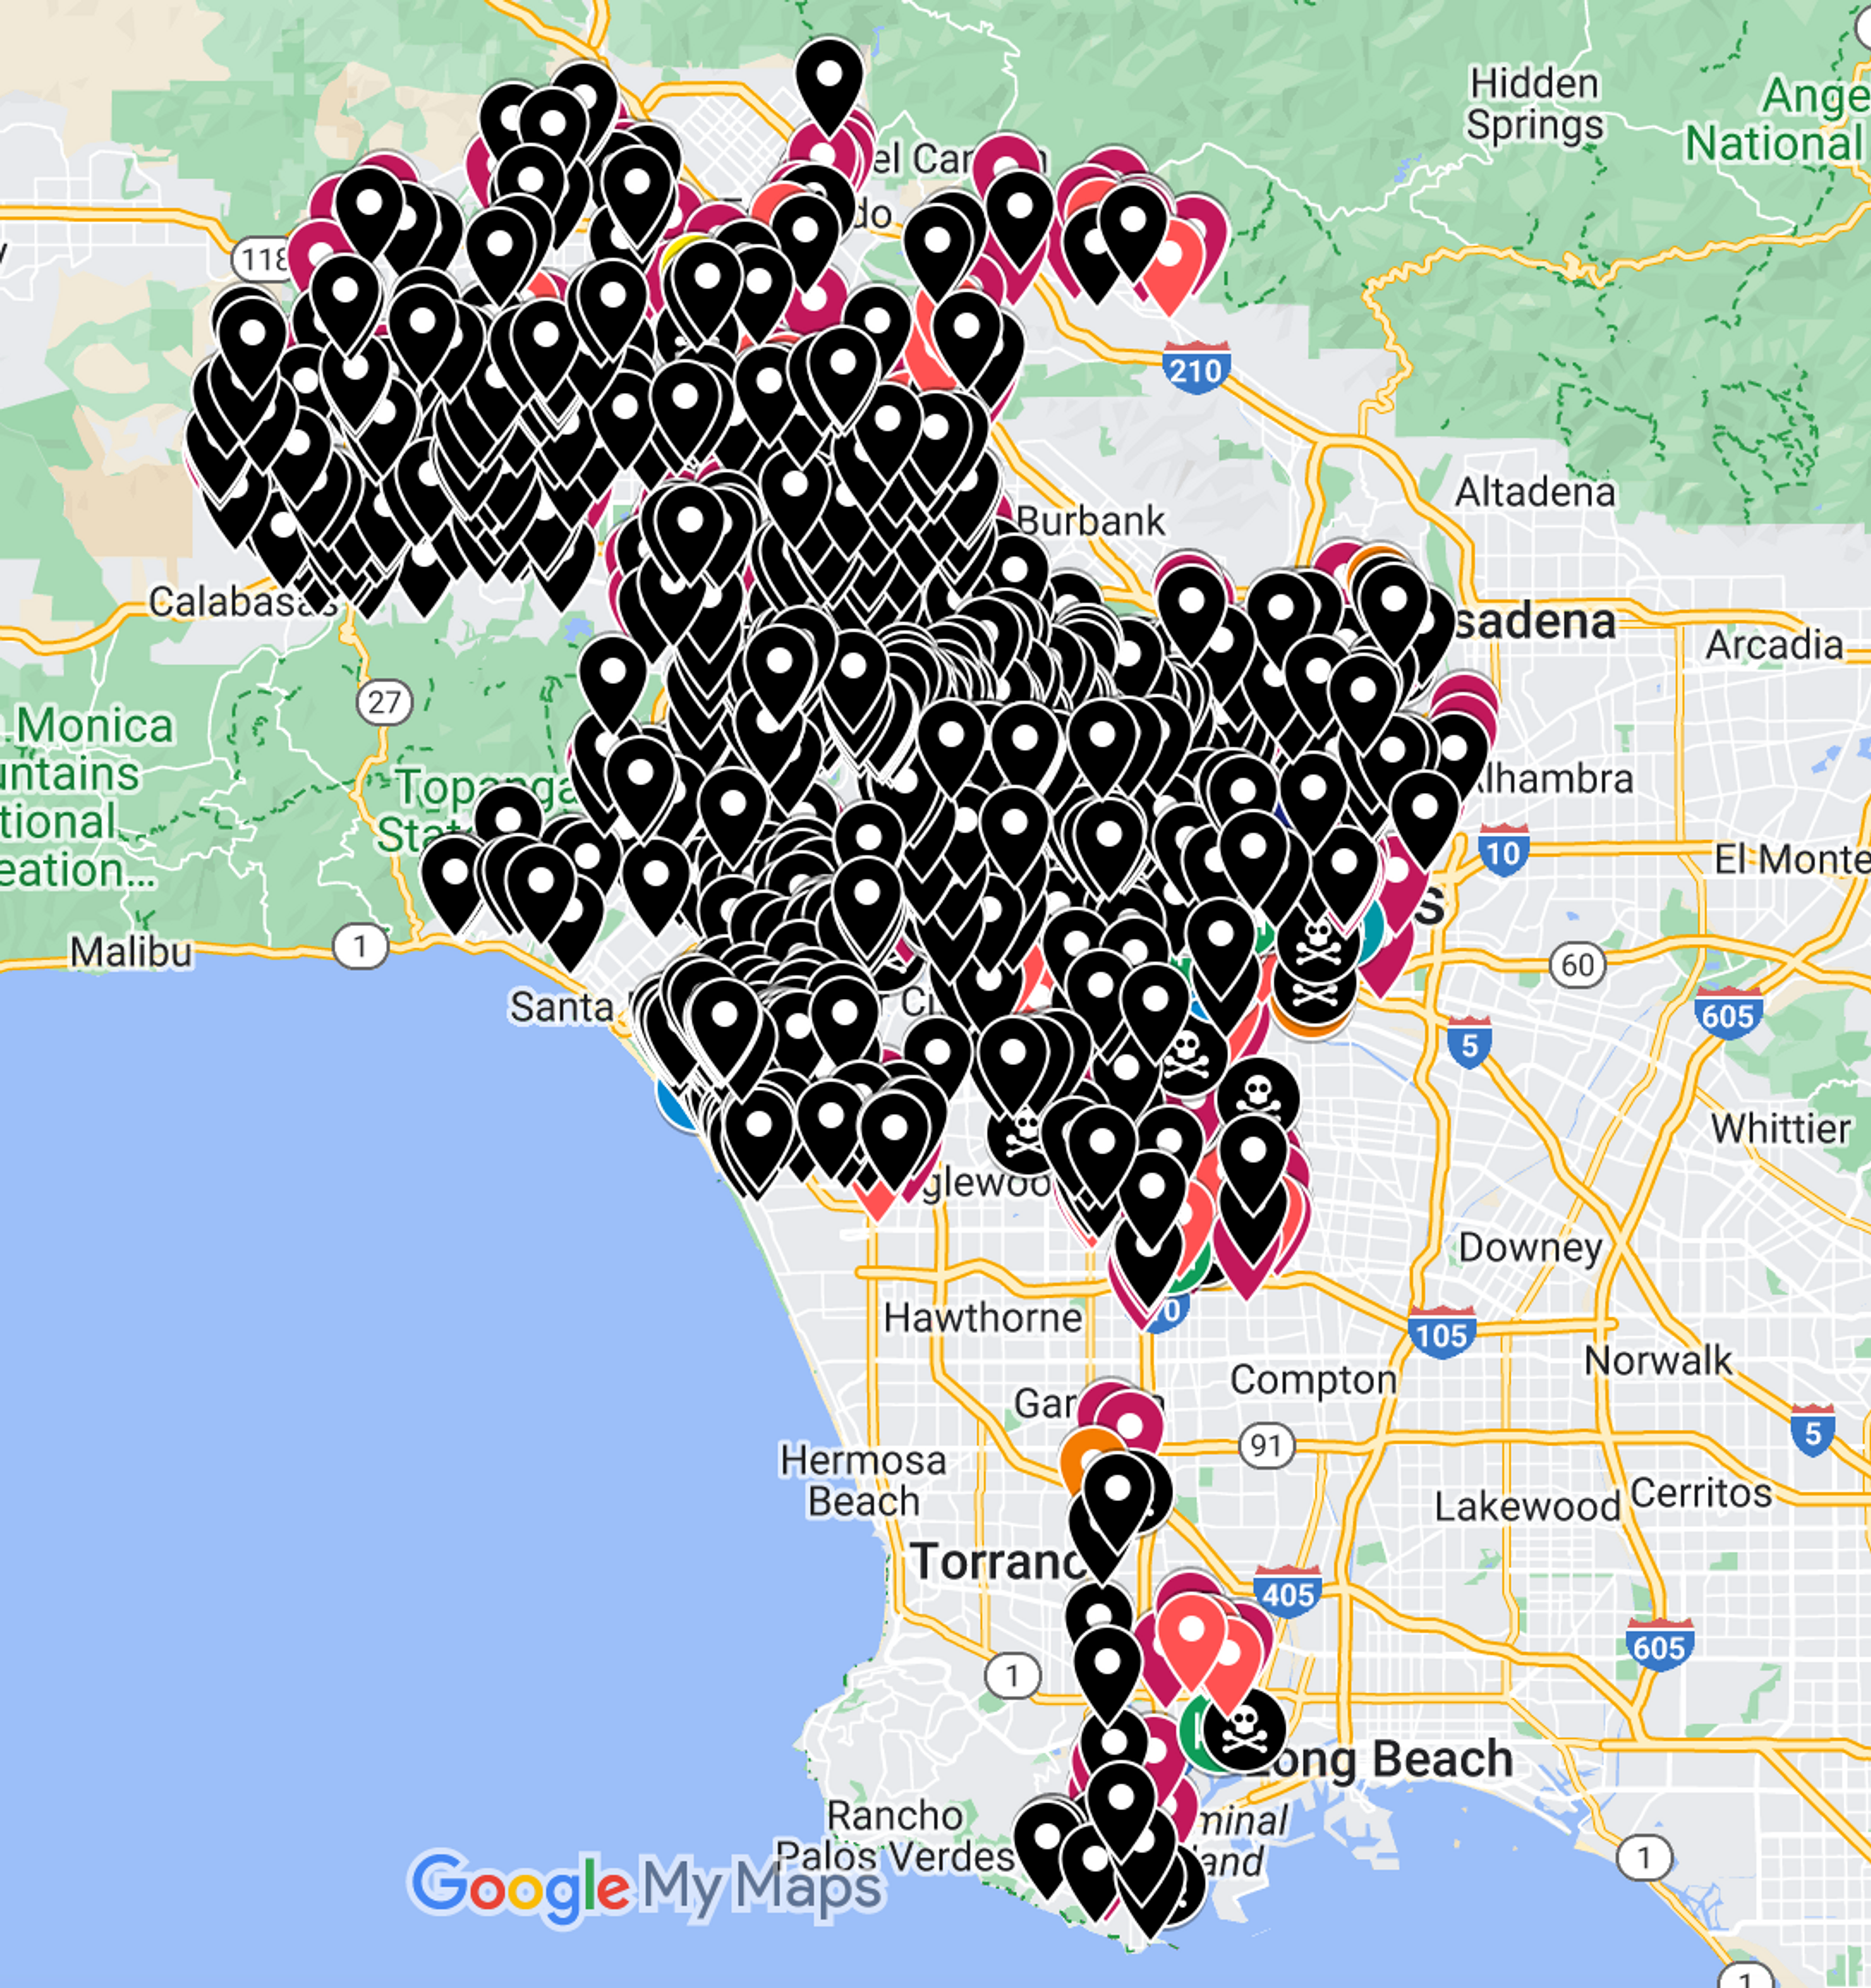 Screenshot of updated map with 1,048 black balloons showing home-share citations